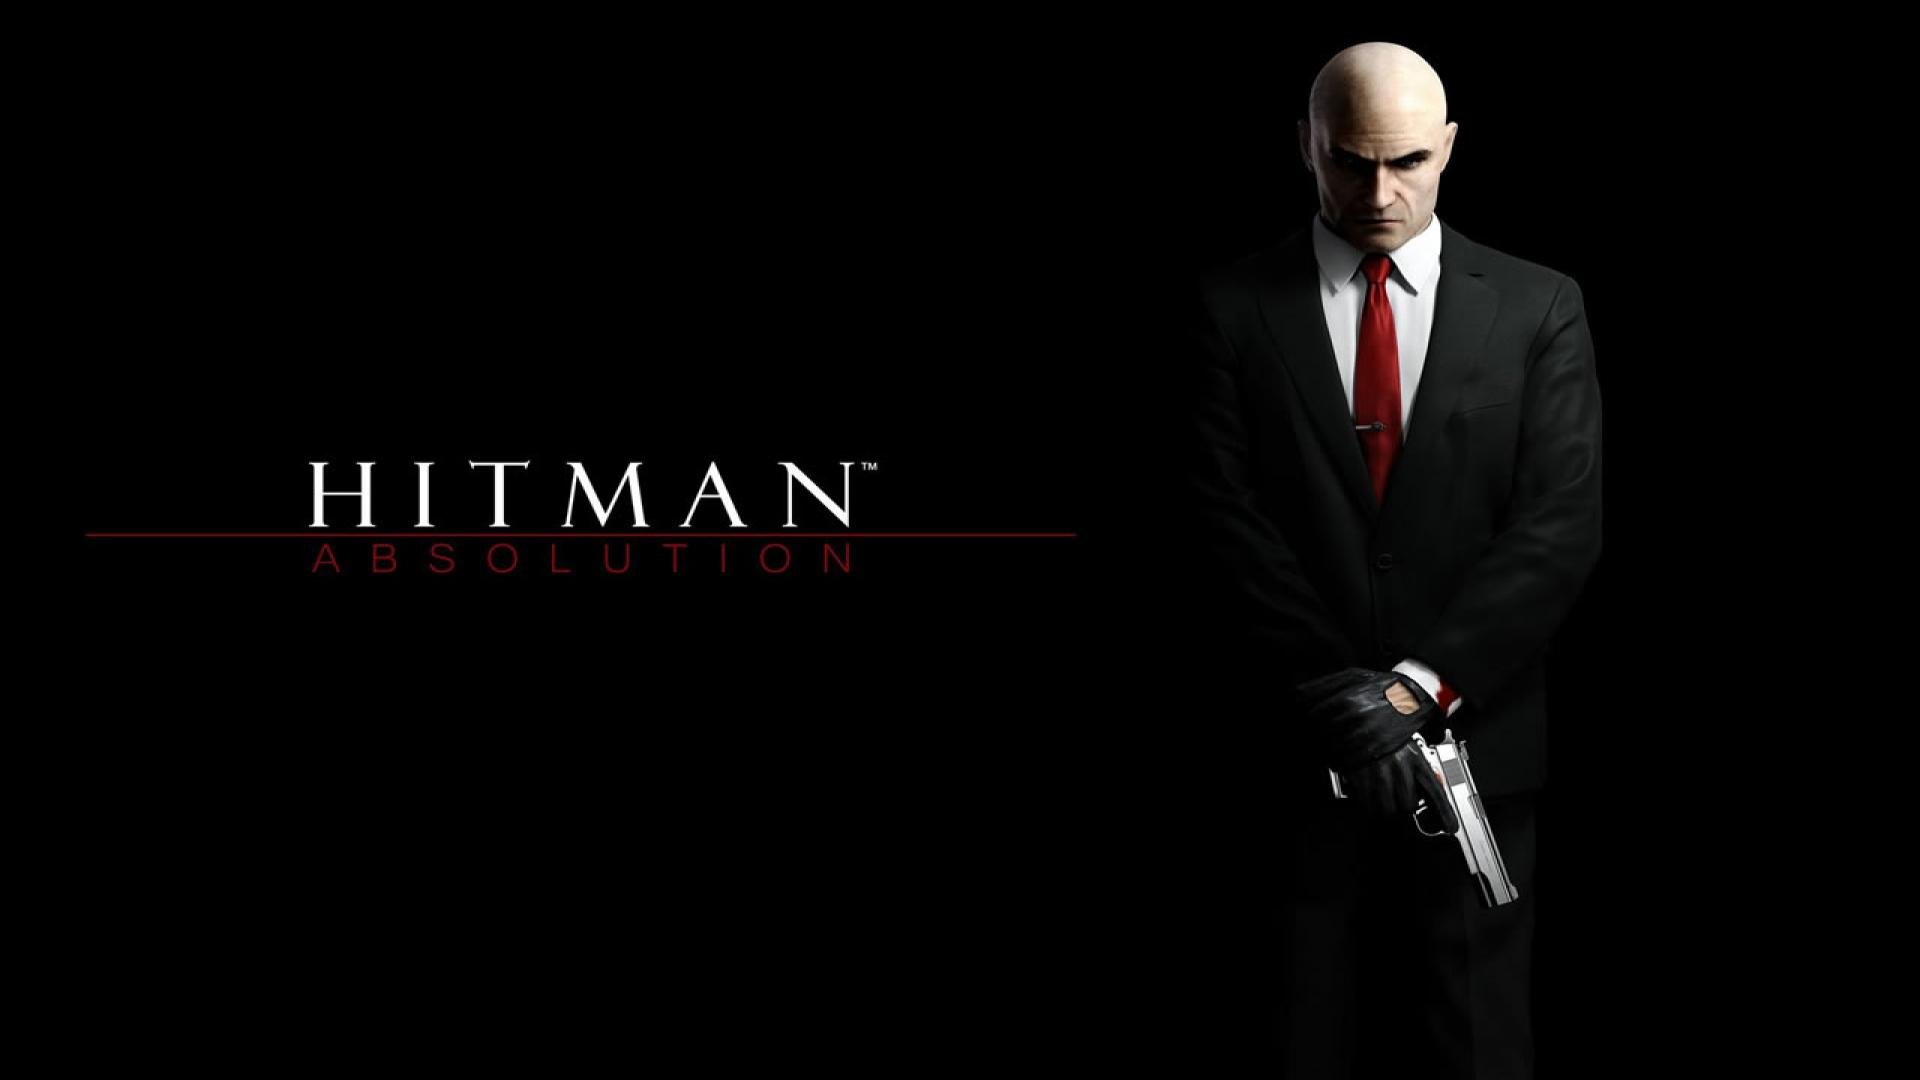 Awesome Hitman: Absolution free wallpaper ID:259767 for full hd 1920x1080 desktop